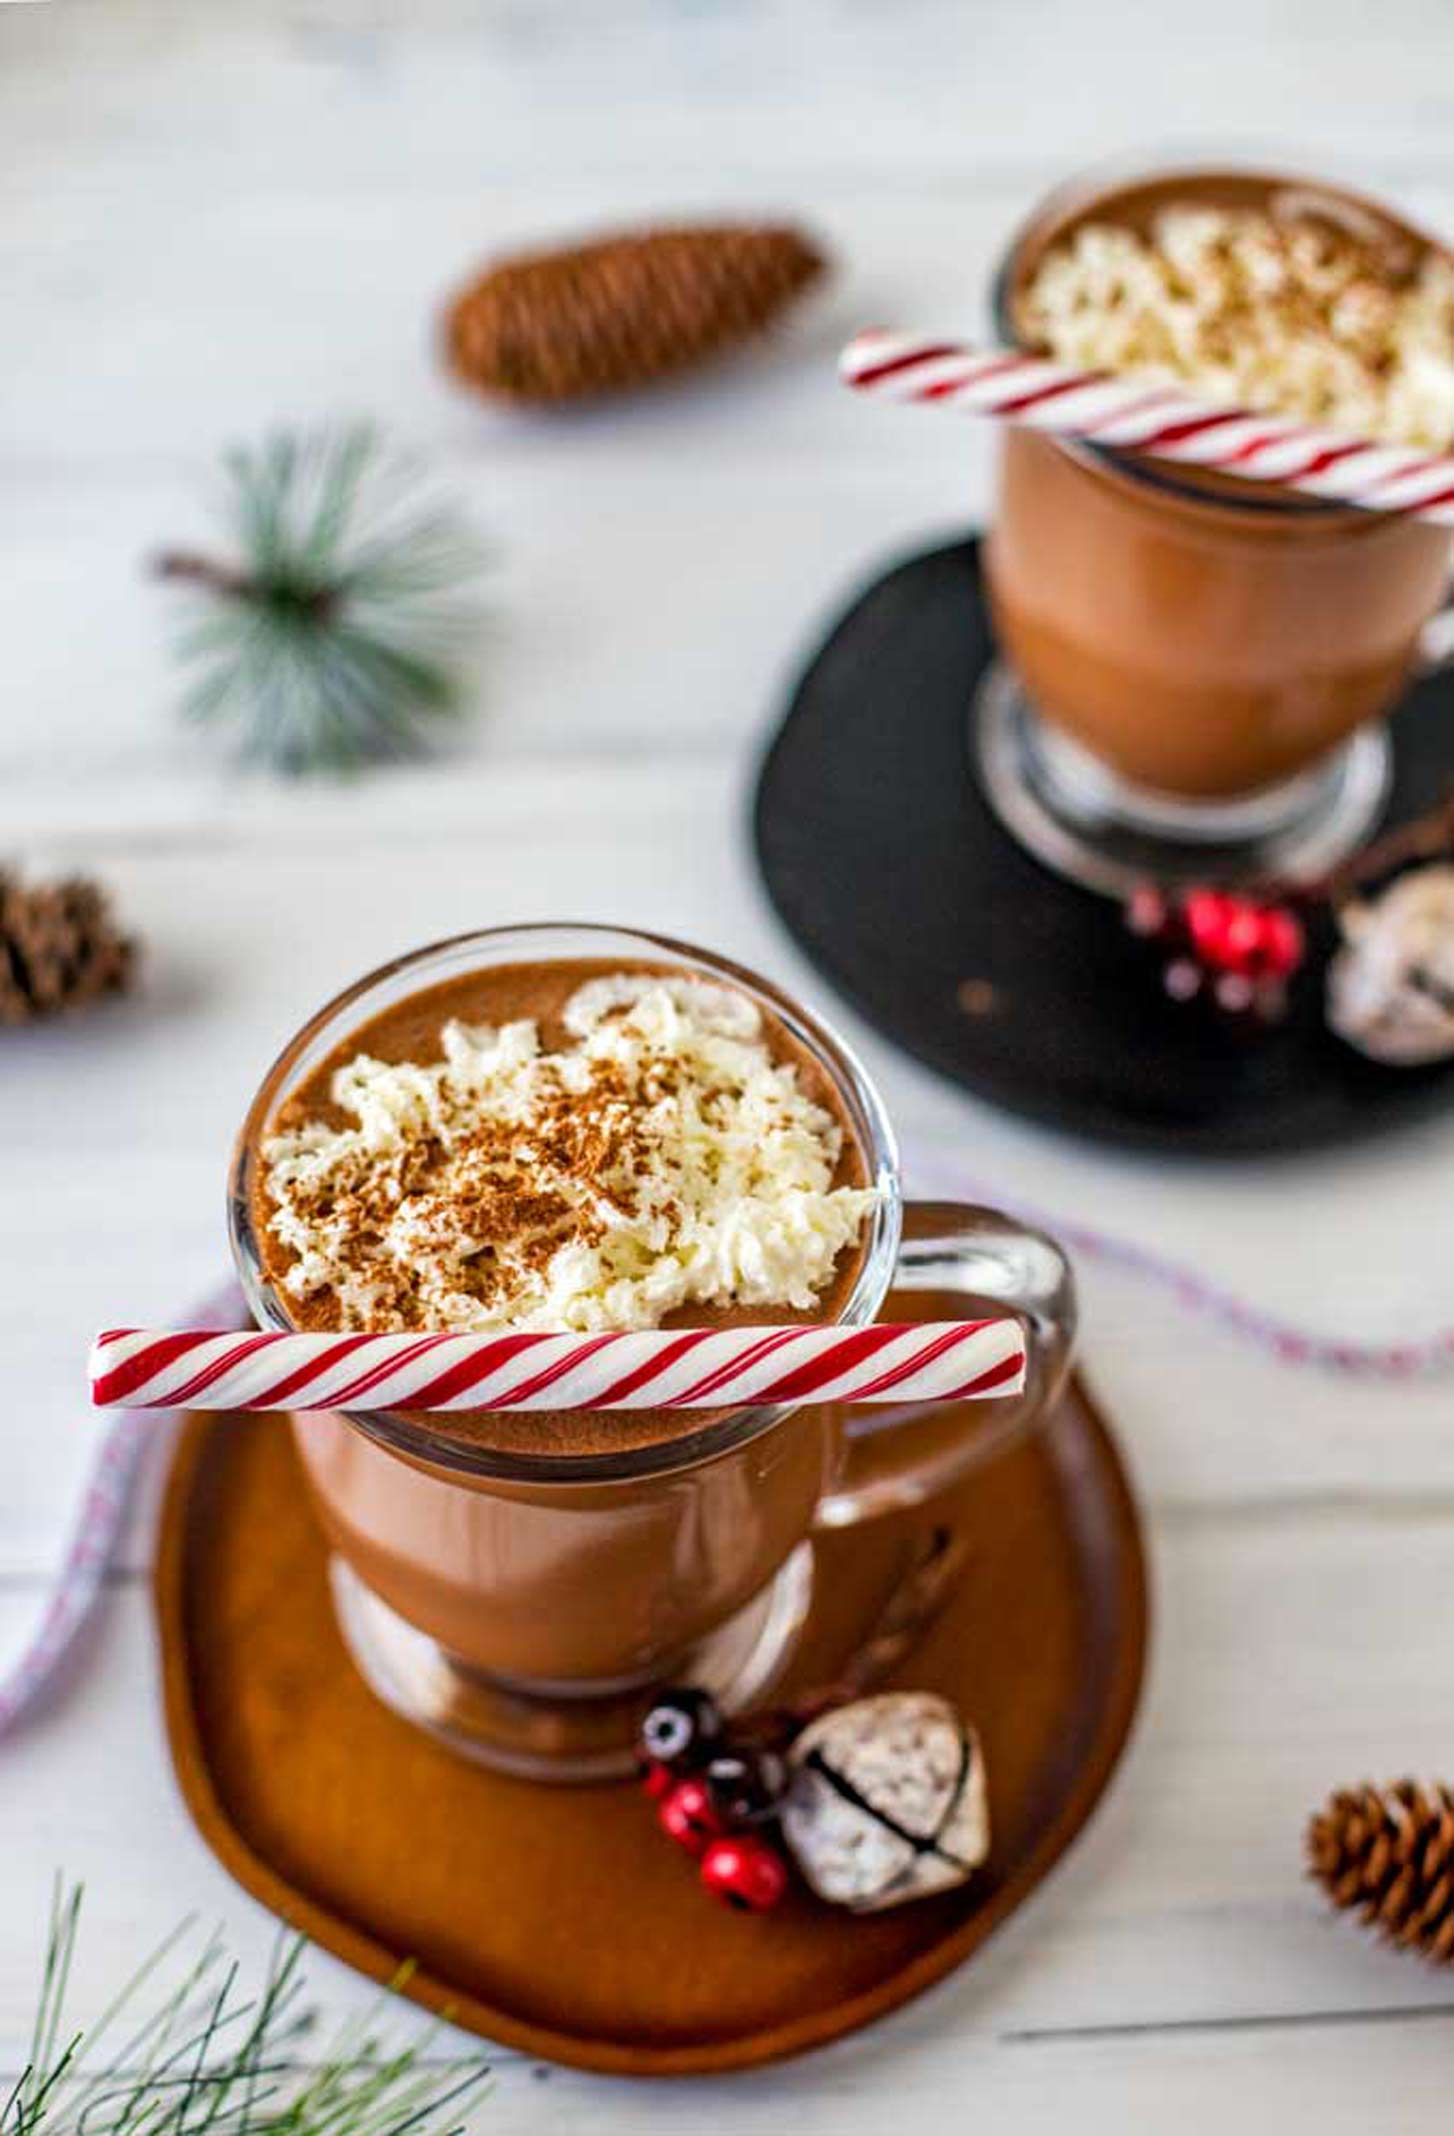 Photo of crockpot hot chocolate in a glass mug garnished with whipped cream.